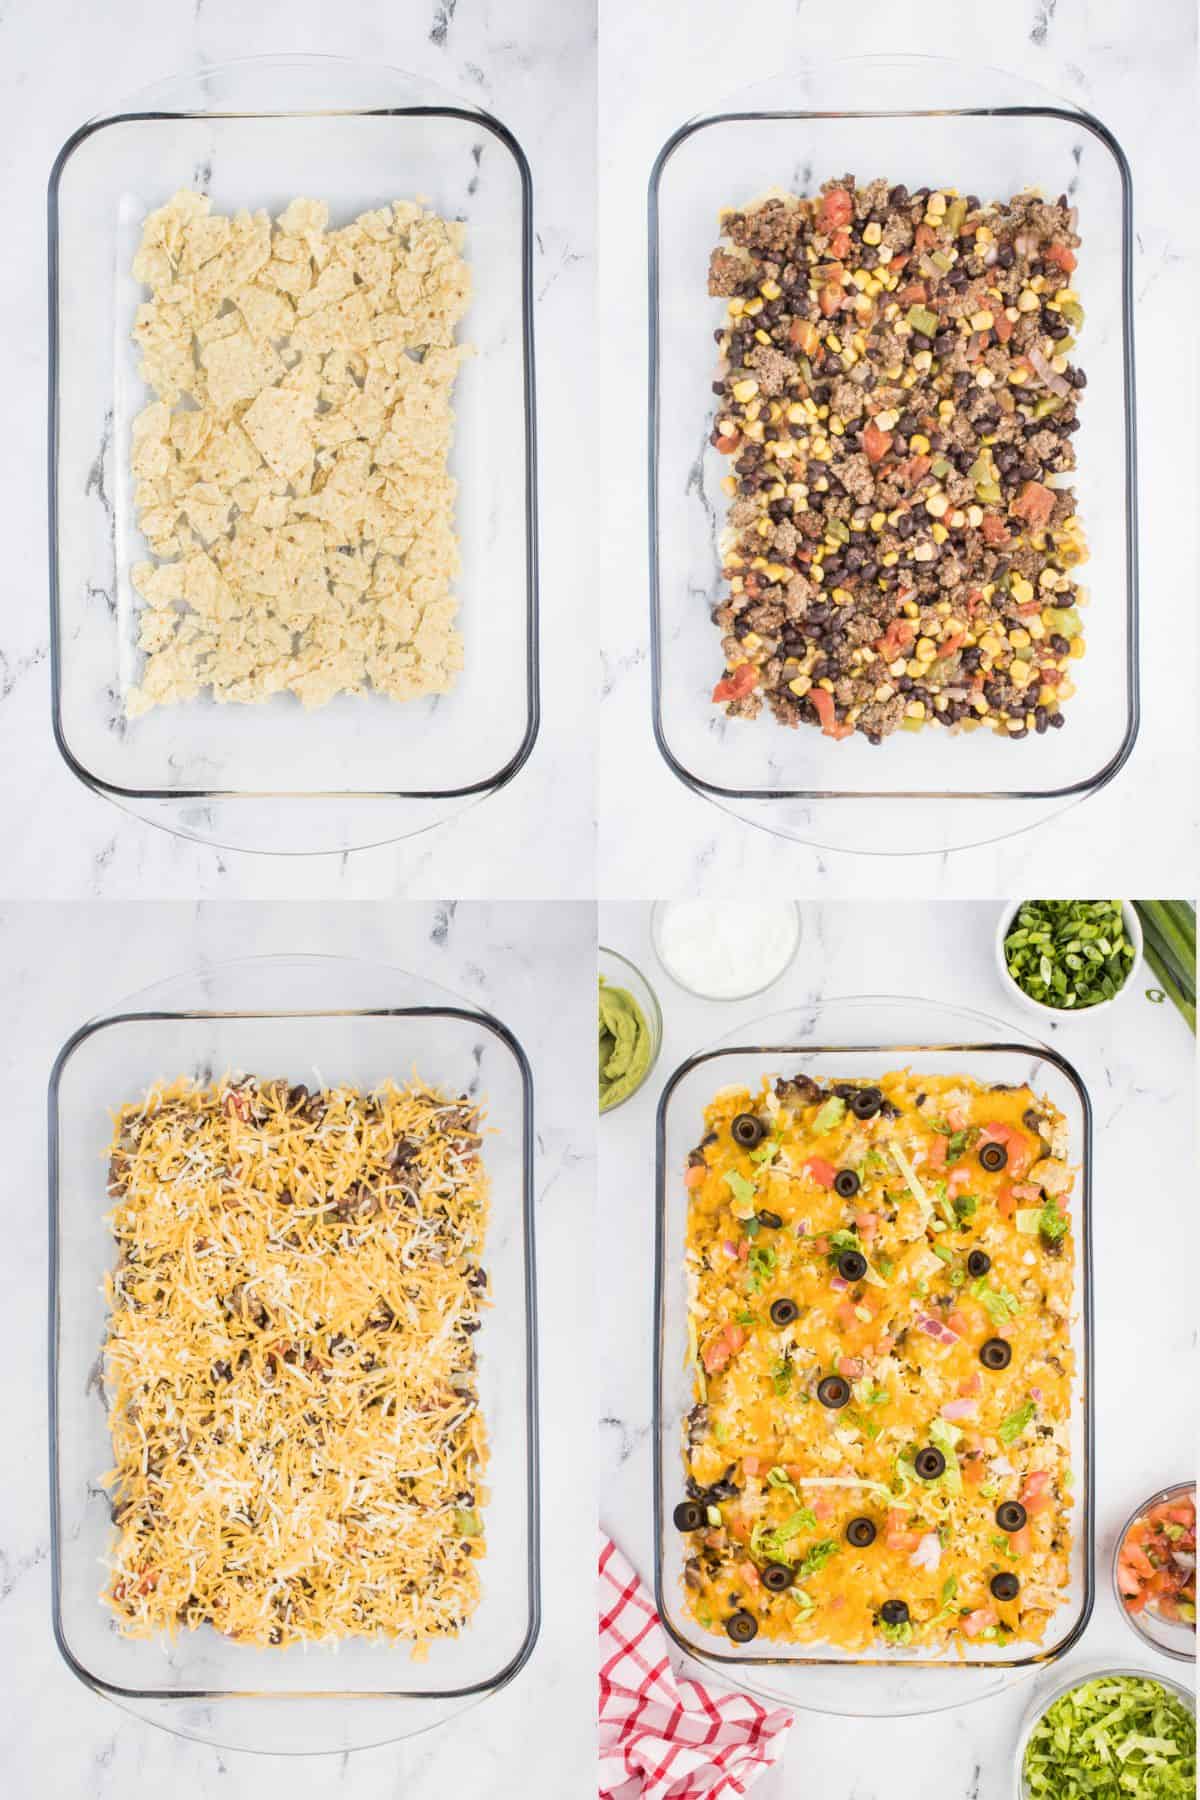 A 4-image collage of a taco casserole preparation. The first image shows crushed tortilla chips evenly spread across the bottom of a 9x13-inch casserole dish. The second image displays half of the ground beef mixture placed on top of the chips. The third image showcases shredded cheese being sprinkled generously over the beef mixture. The collage captures the step-by-step process of creating a flavorful and cheesy taco casserole.